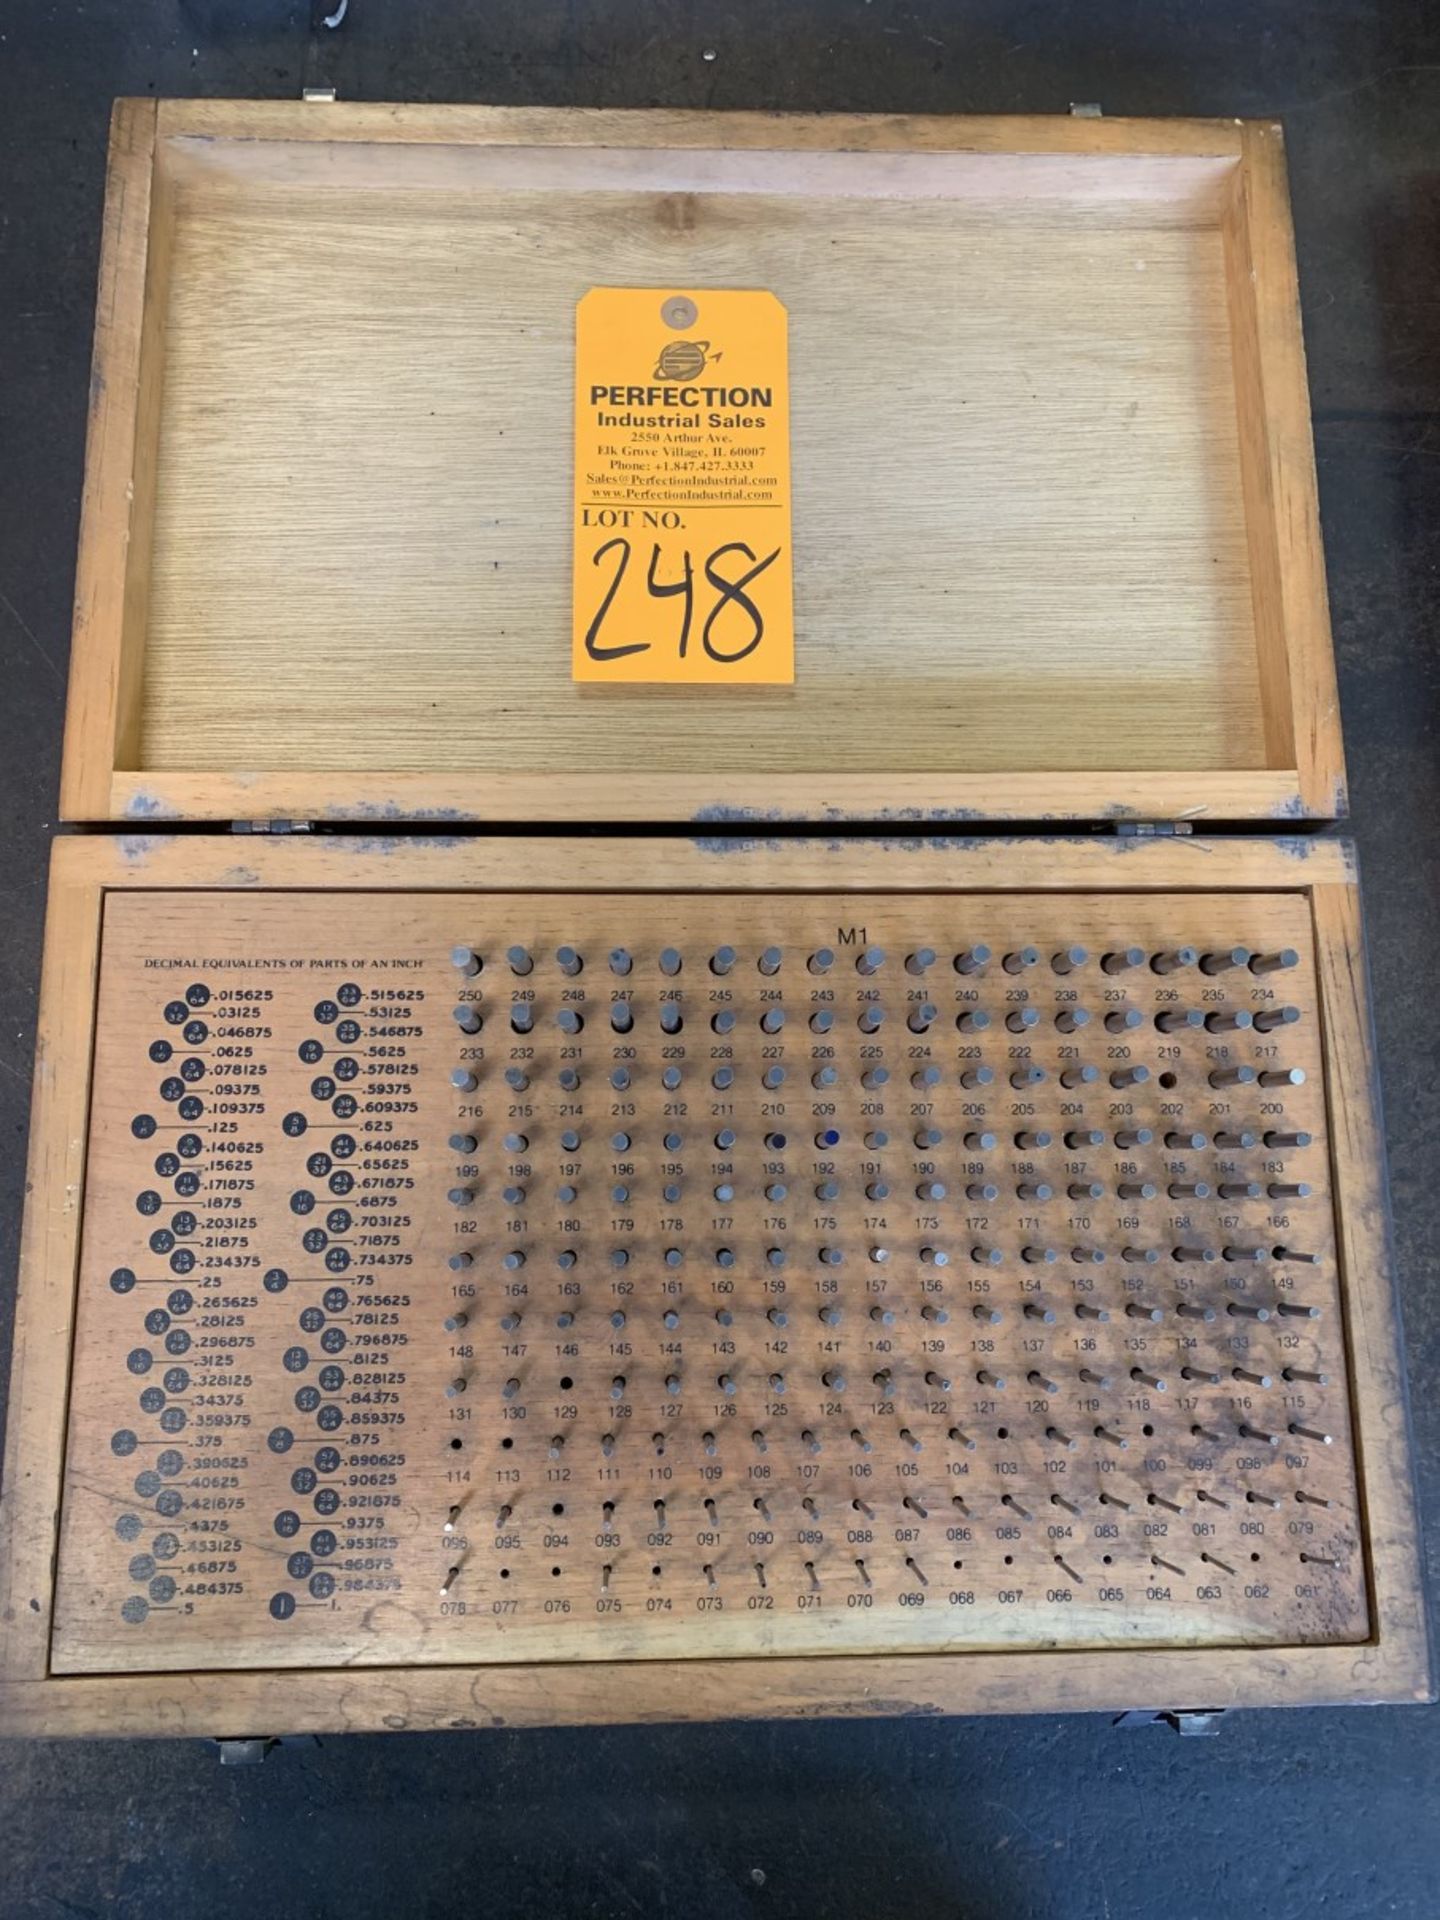 Meyer M1 Plus Pin gage Set from .061-.250 (some missing) (Located at: Goudie Tool & Engineering )